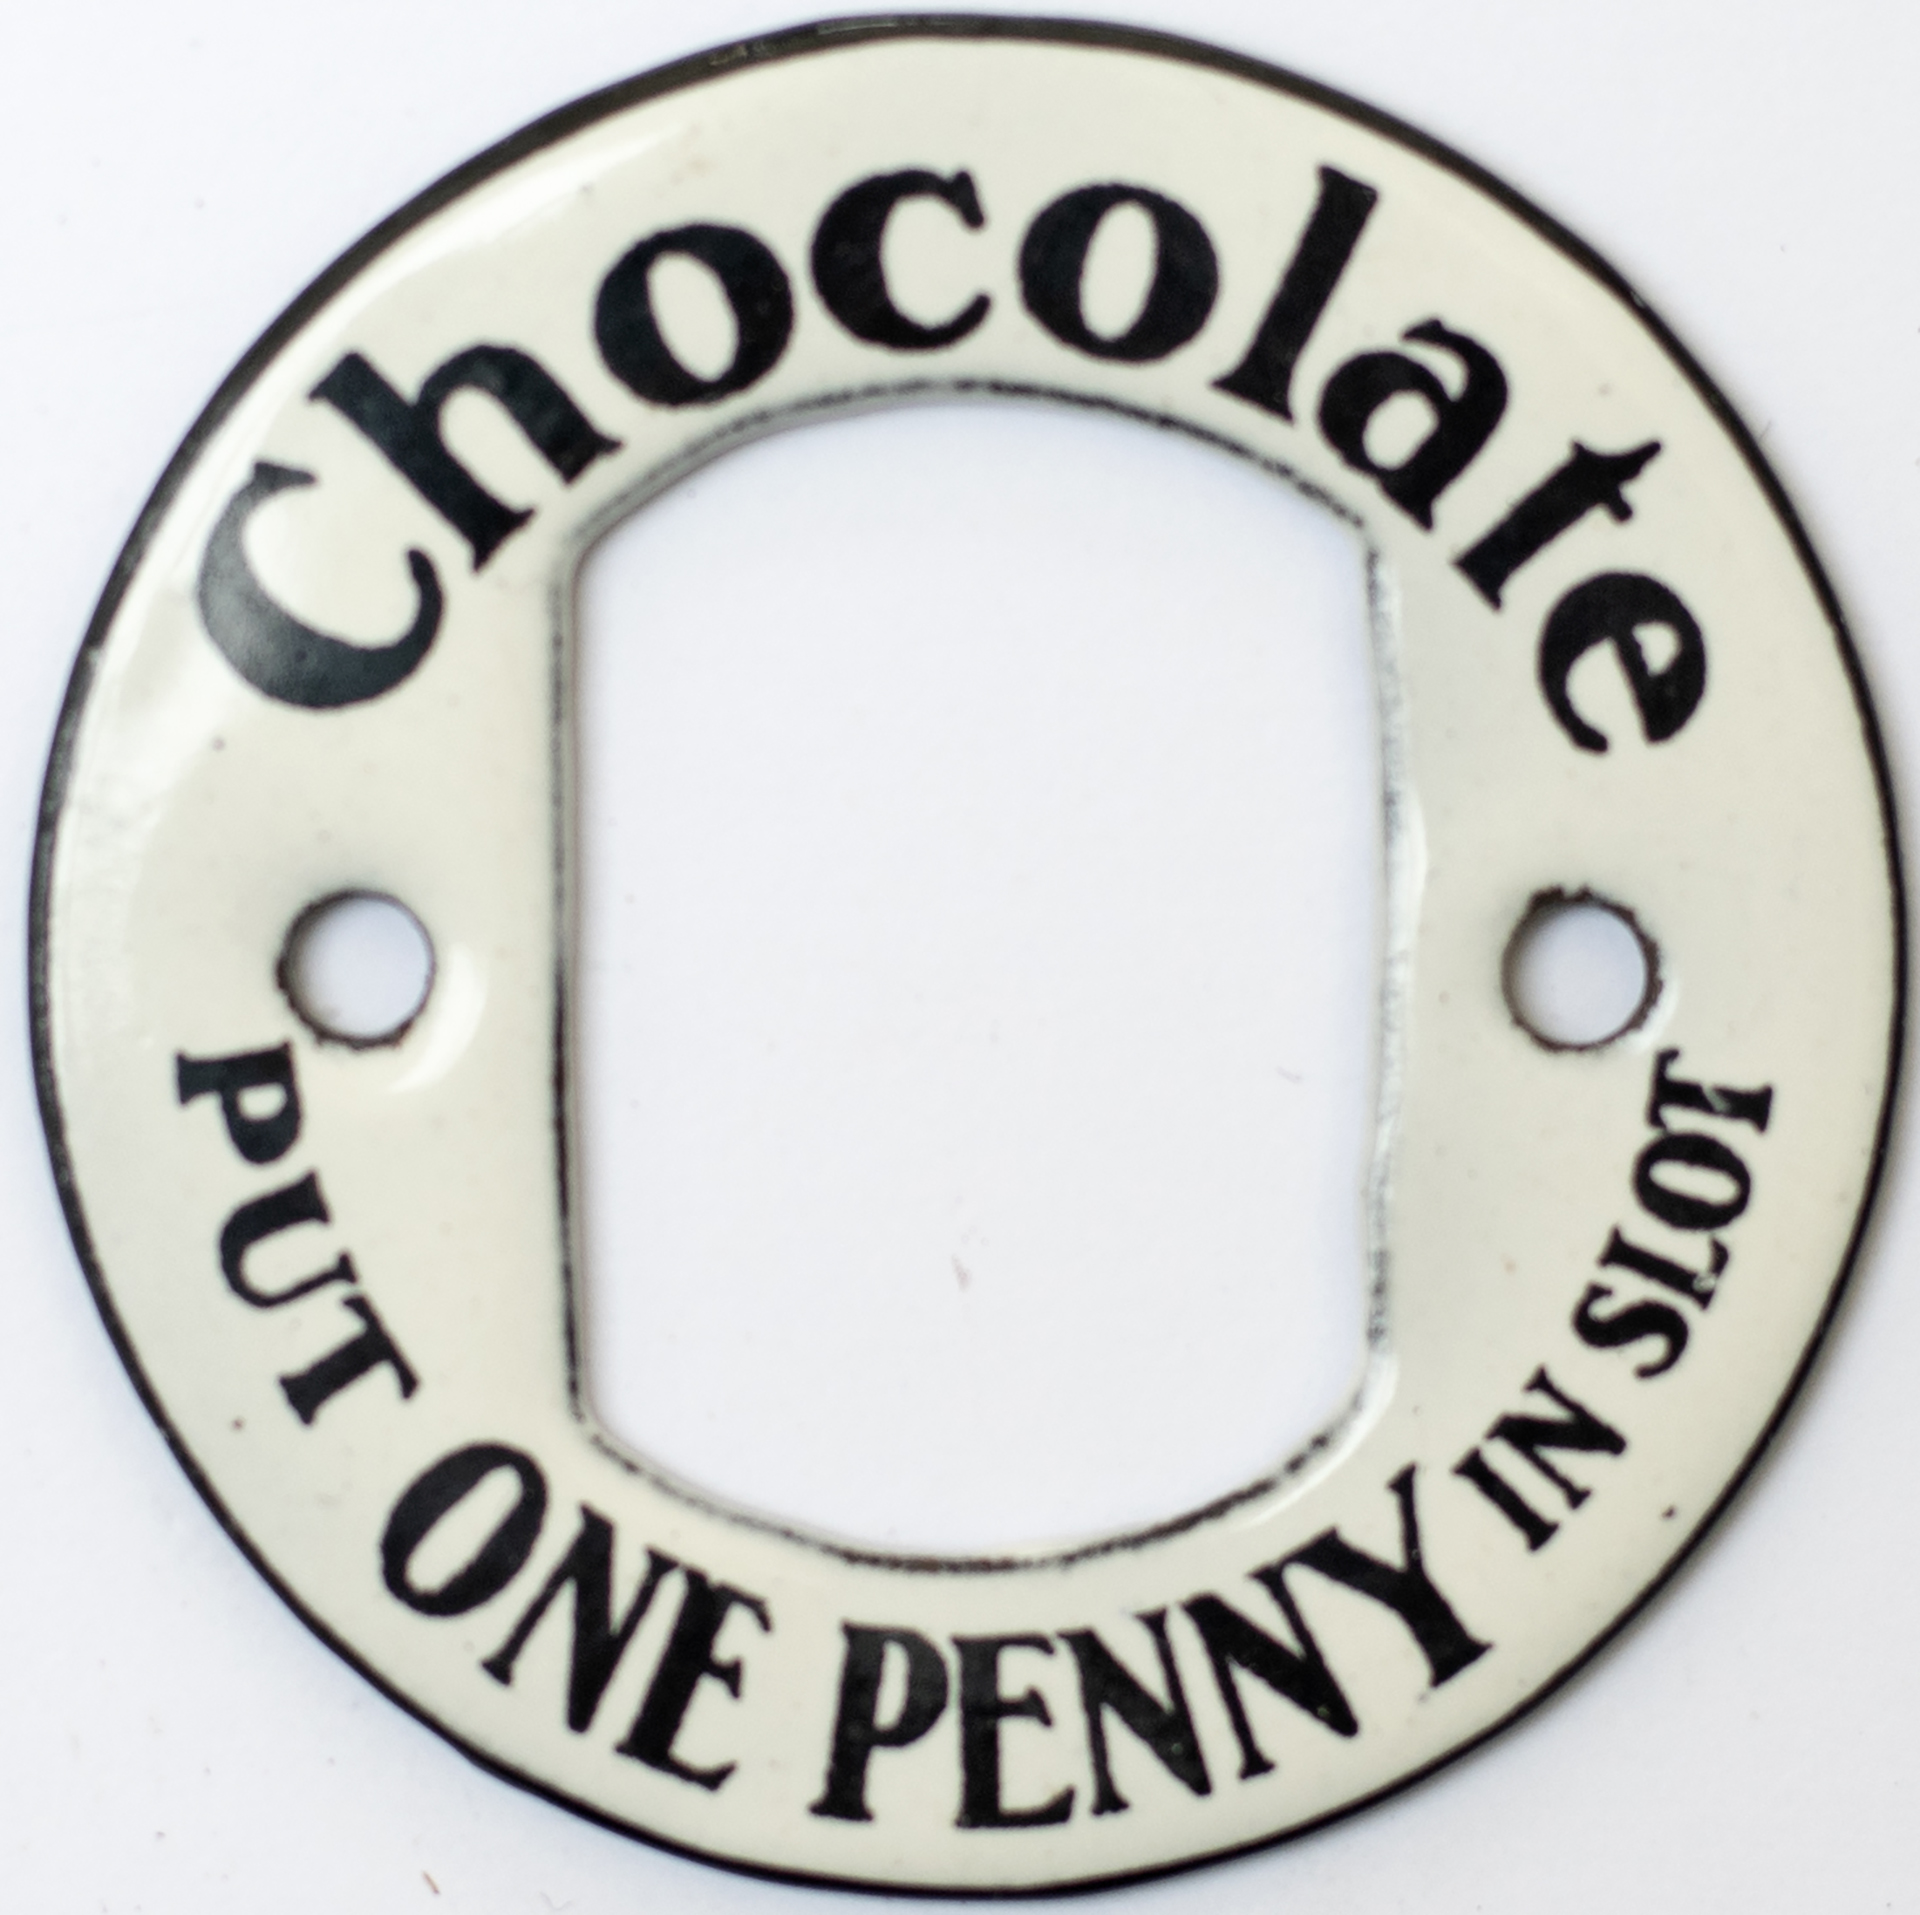 Advertising enamel CHOCOLATE PUT ONE PENNY IN SLOT. As used on vending machines, in mint condition